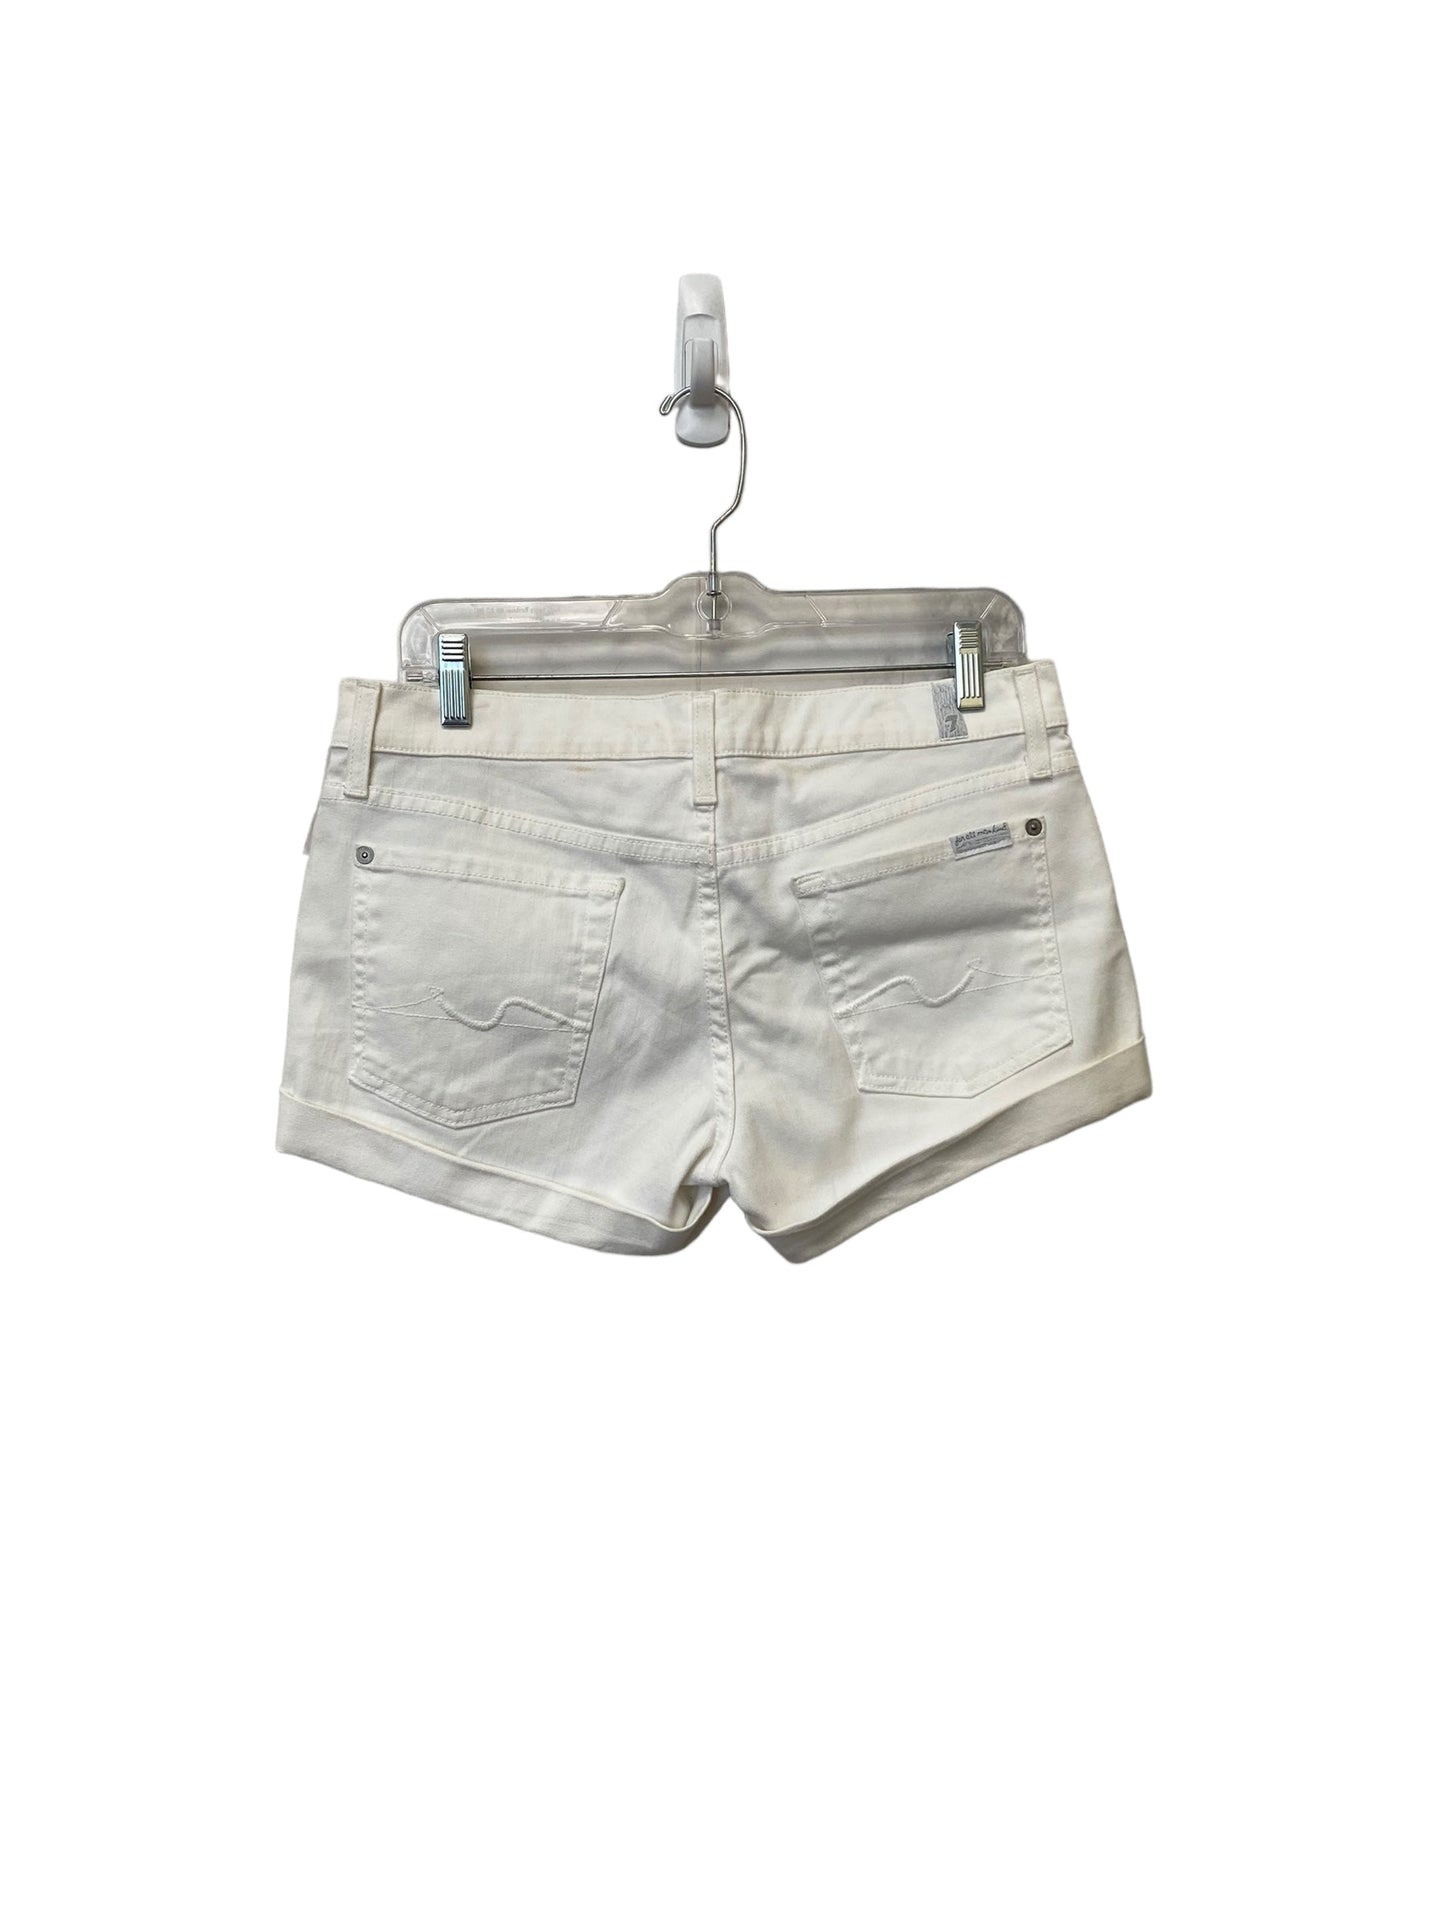 White Shorts 7 For All Mankind, Size 28